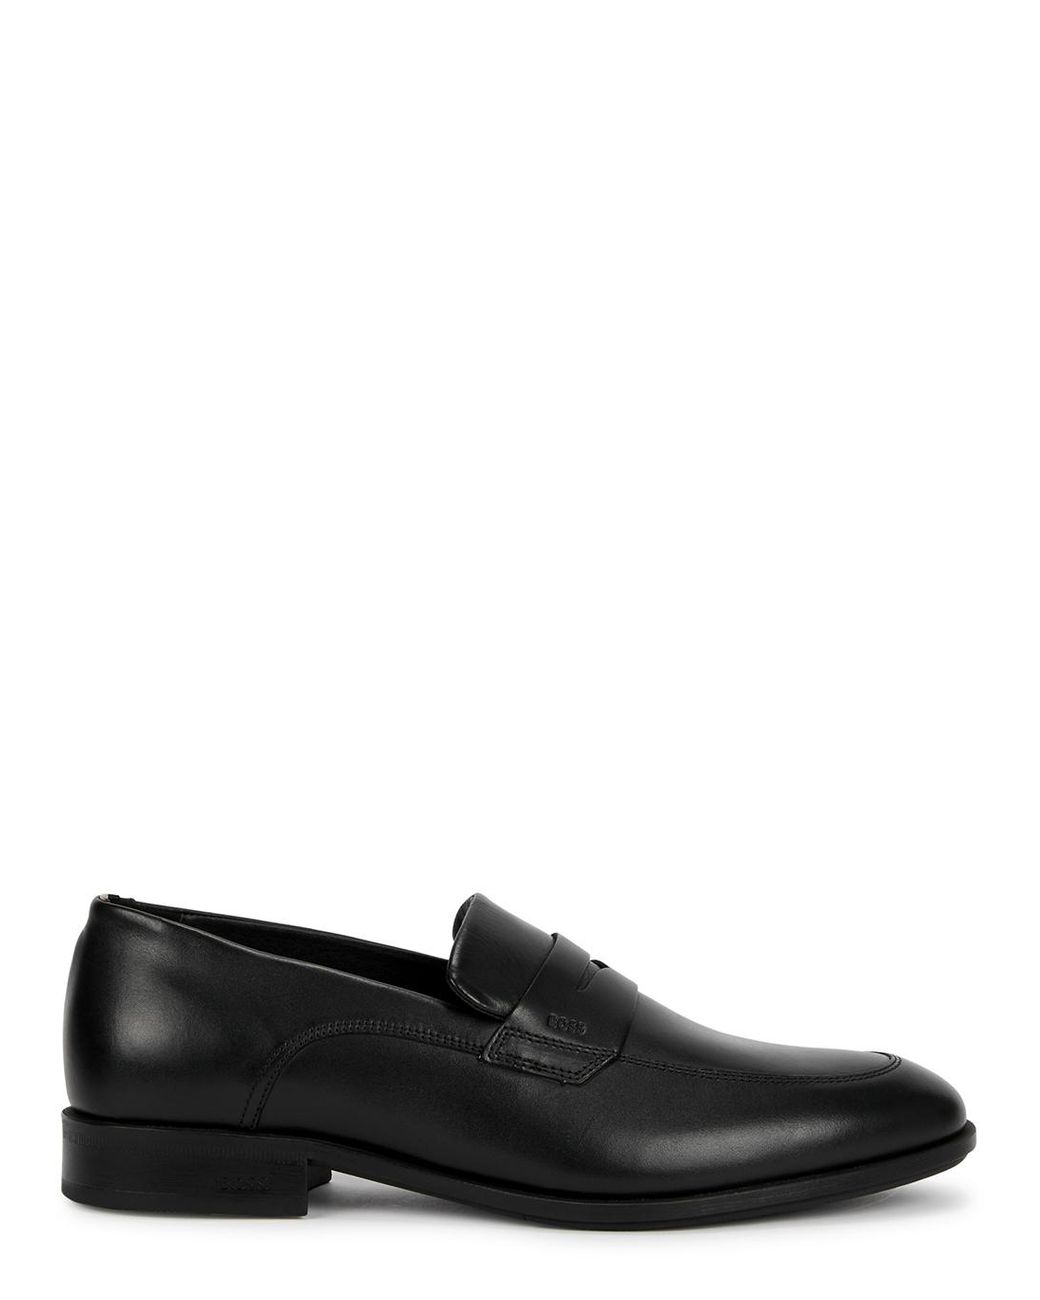 BOSS by HUGO BOSS Colby Leather Loafers in Black for Men | Lyst